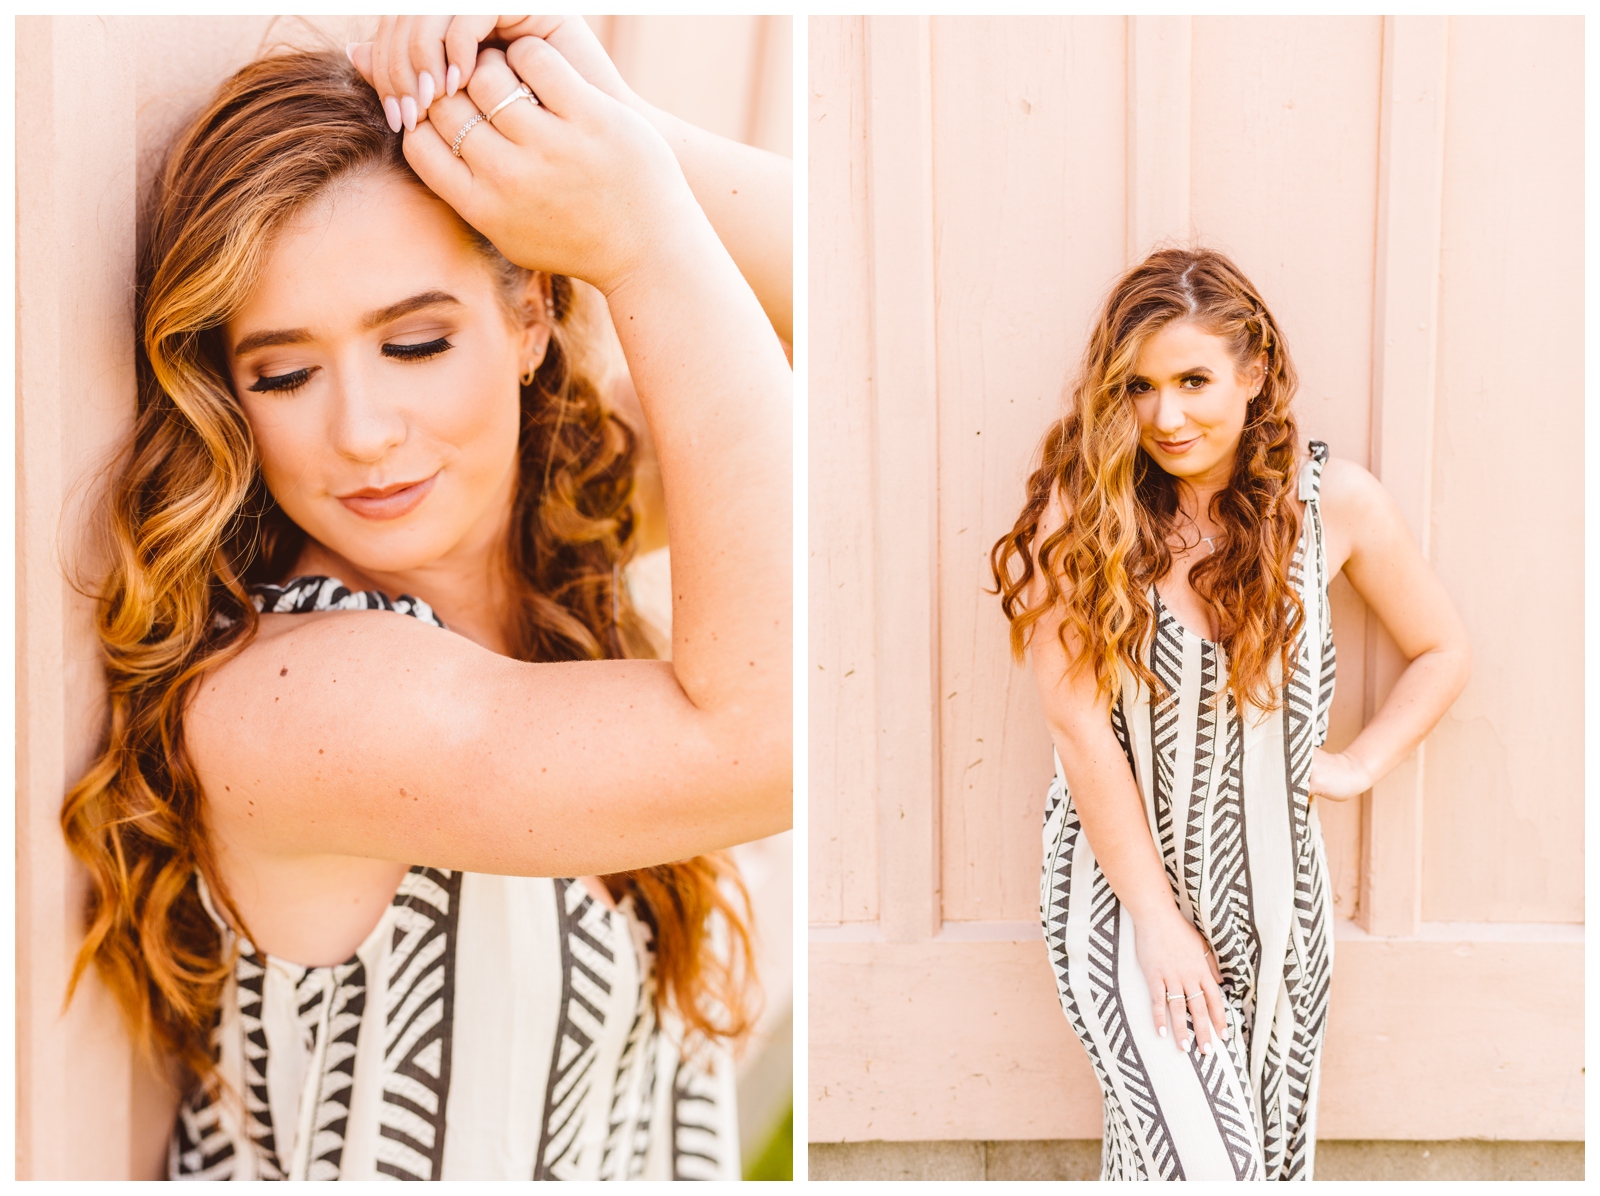 Bright, Bold and Colorful Senior Portrait Session Inspiration - Brooke Michelle Photography